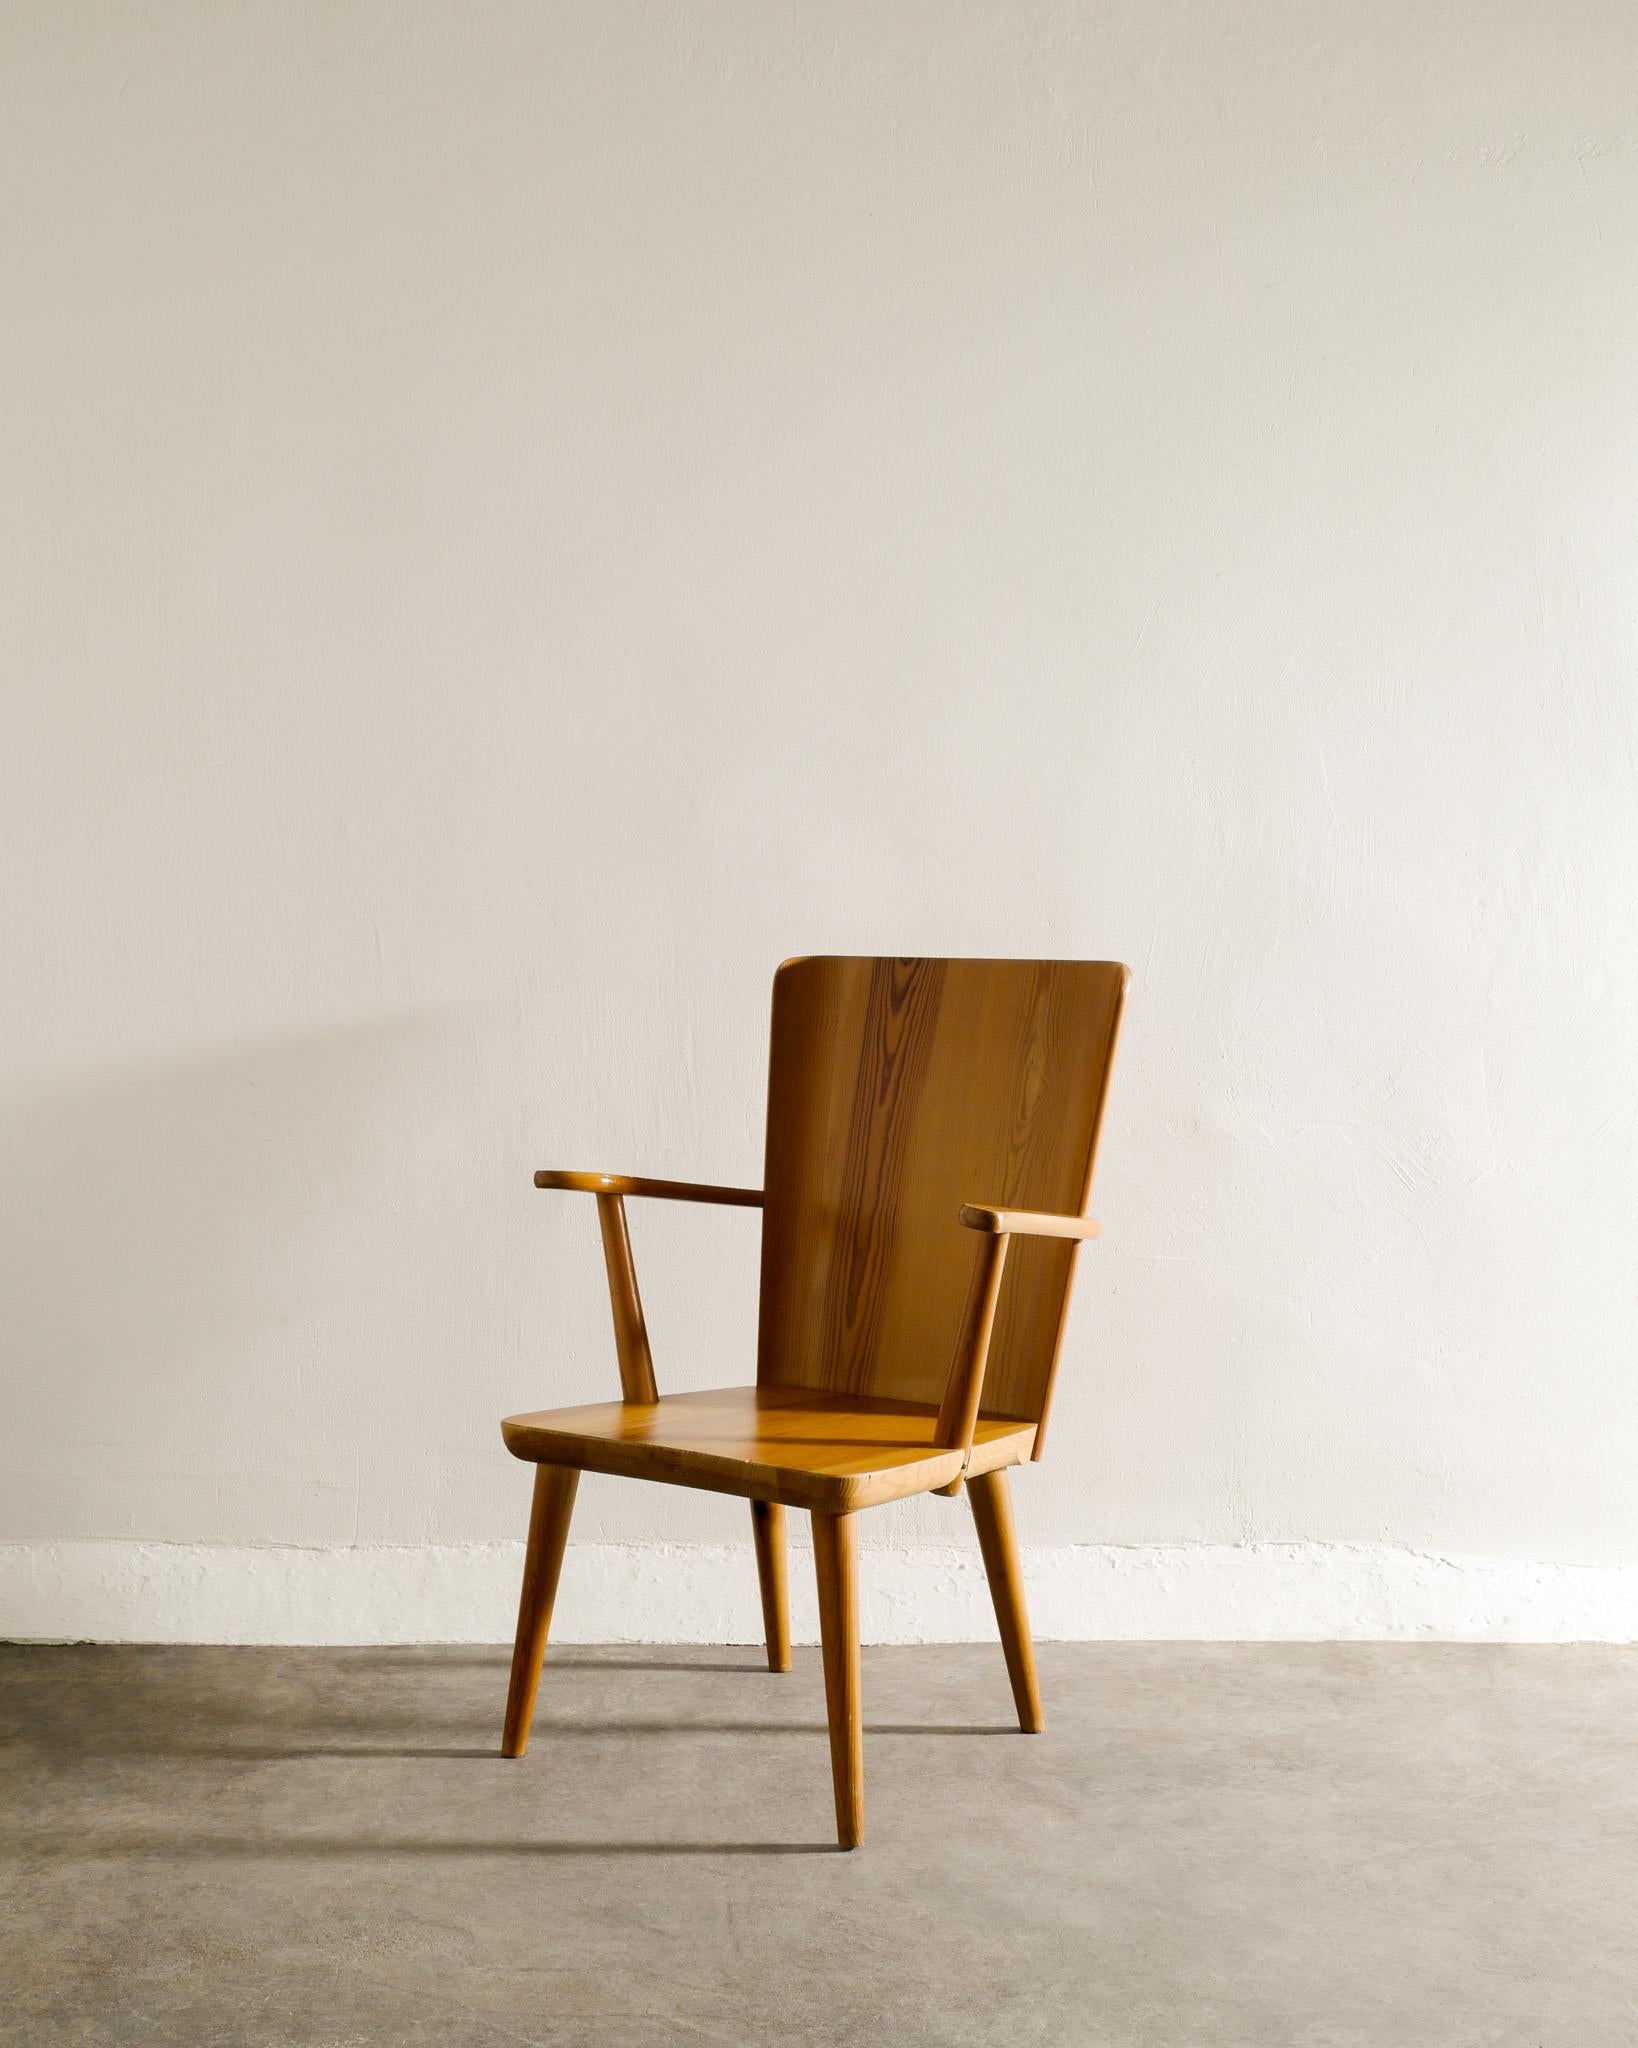 Scandinavian Modern Mid Century Arm Chair in Pine by Göran Malmvall Produced by Svensk Fur, 1940s For Sale